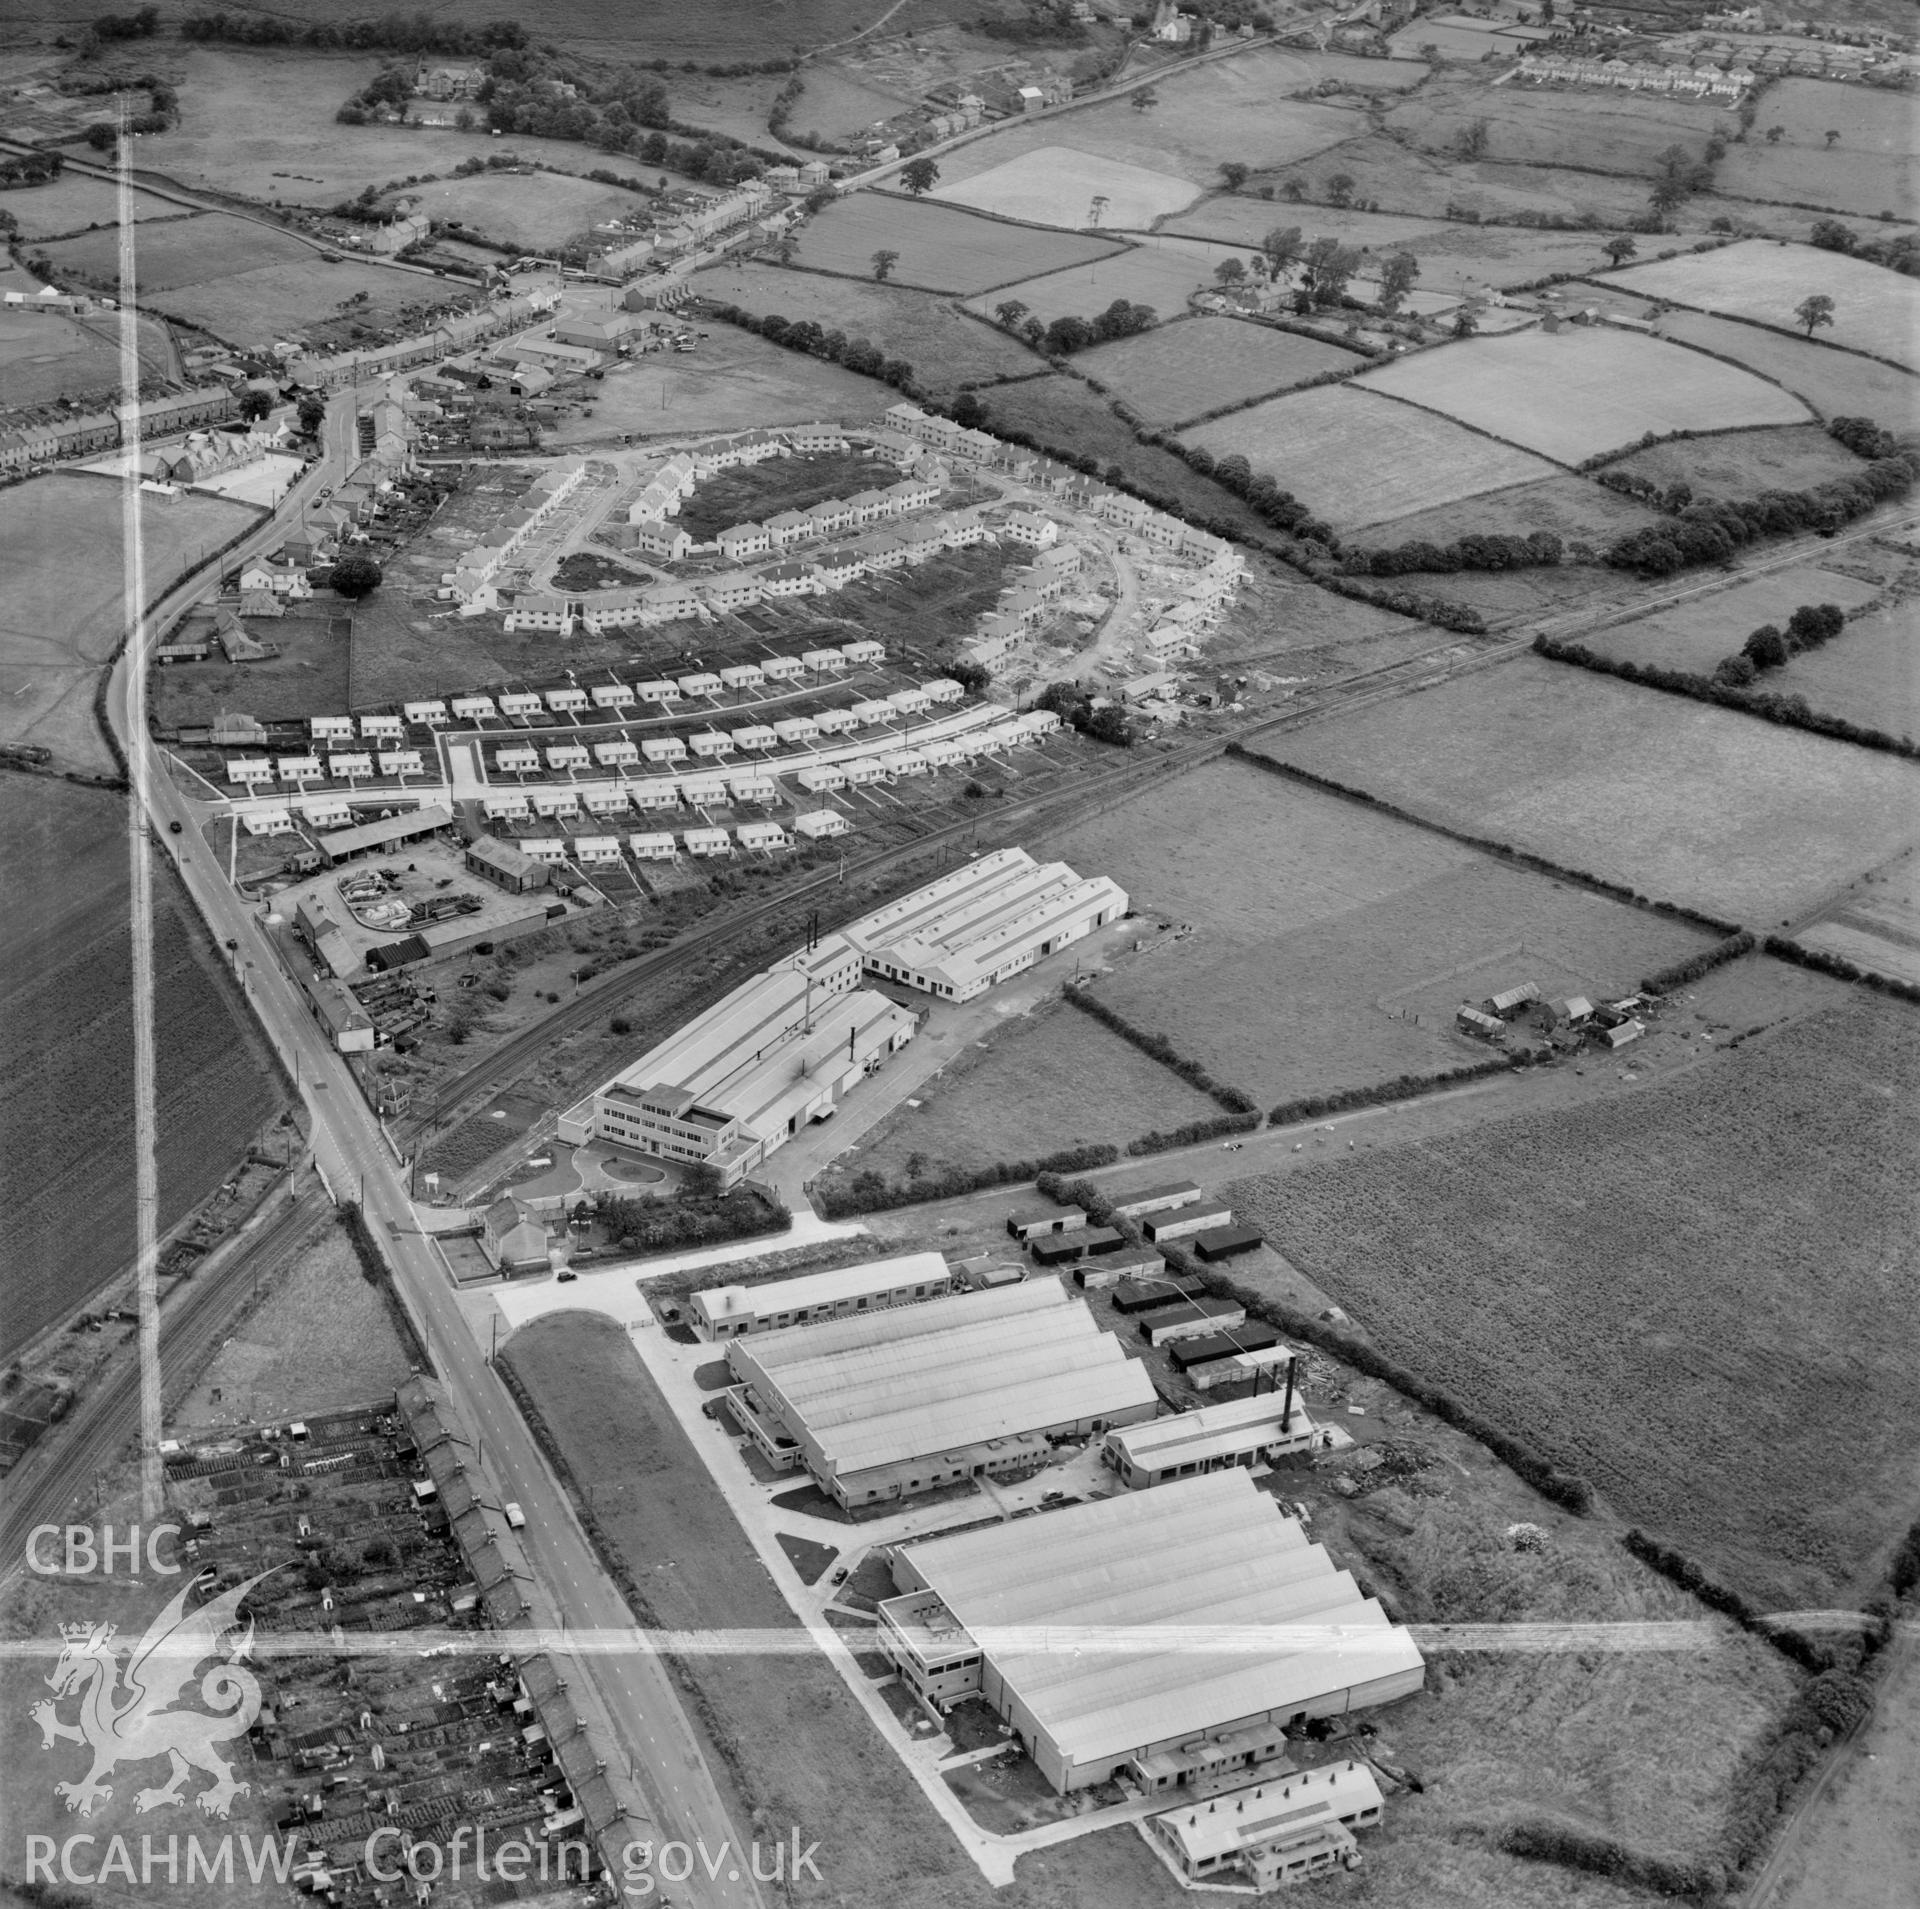 View of factories and housing near Talbot Green, including temporary prefab housing